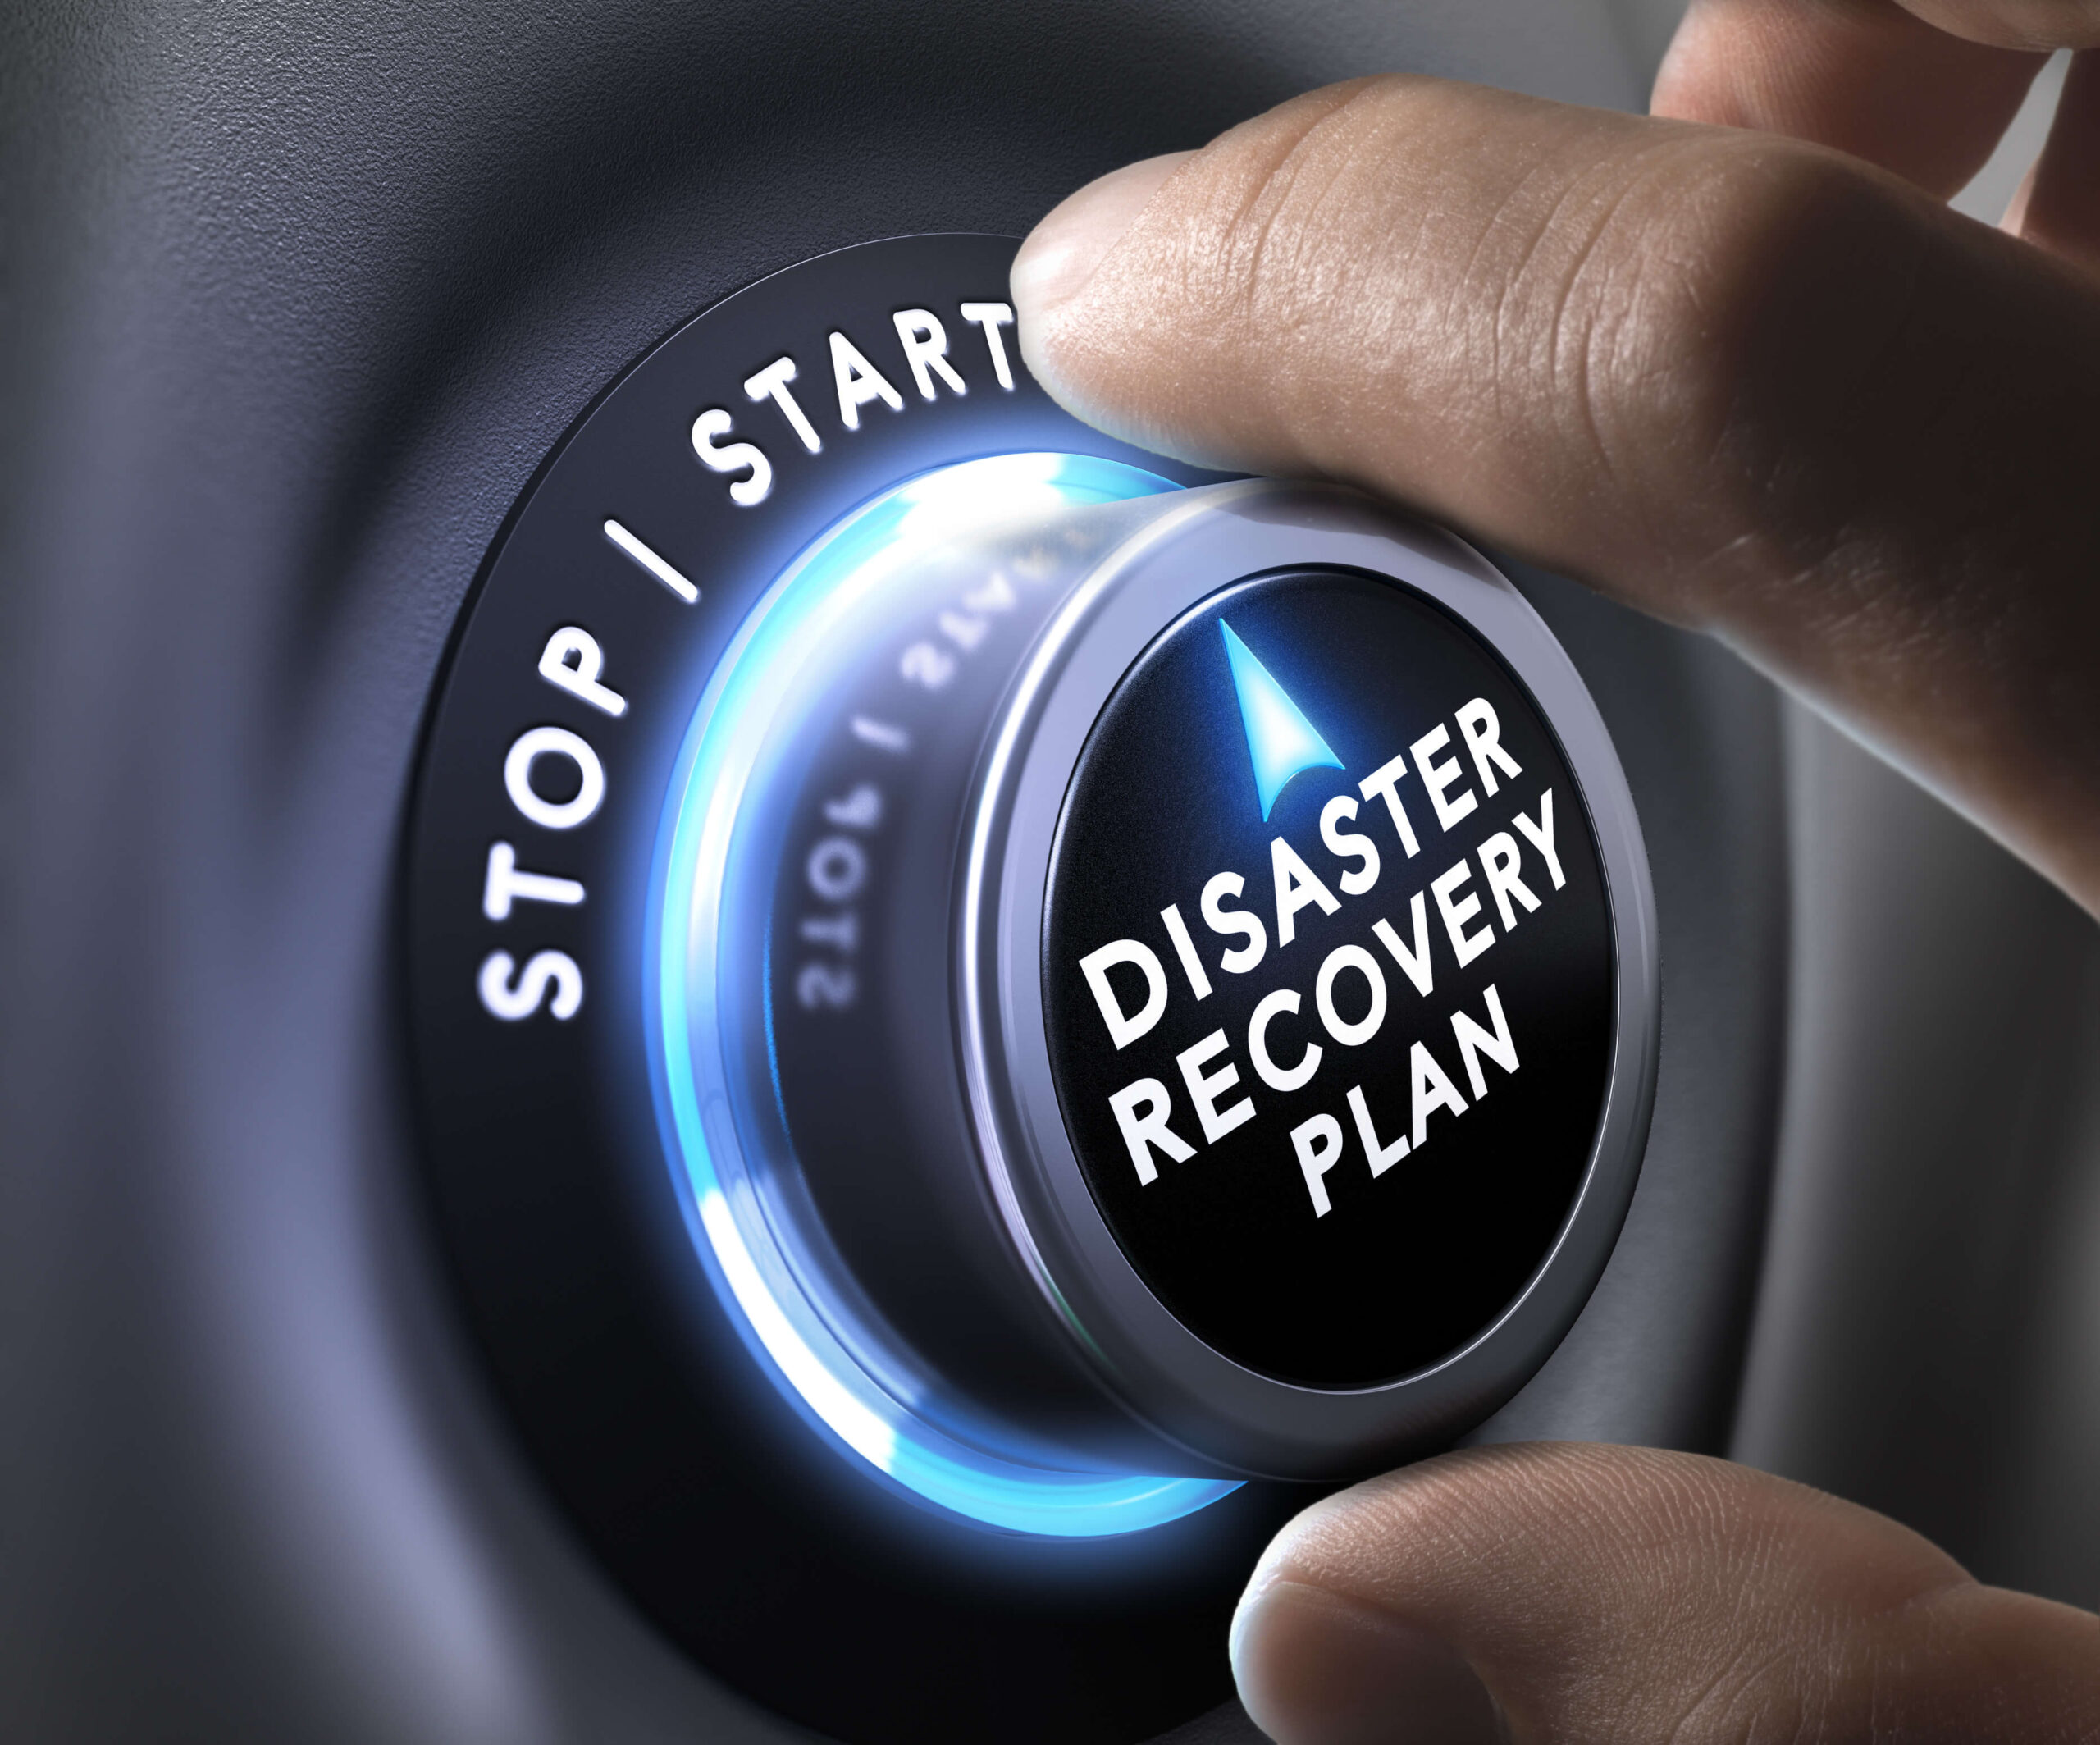 Disaster Recovery Plan | ShortArm Solution